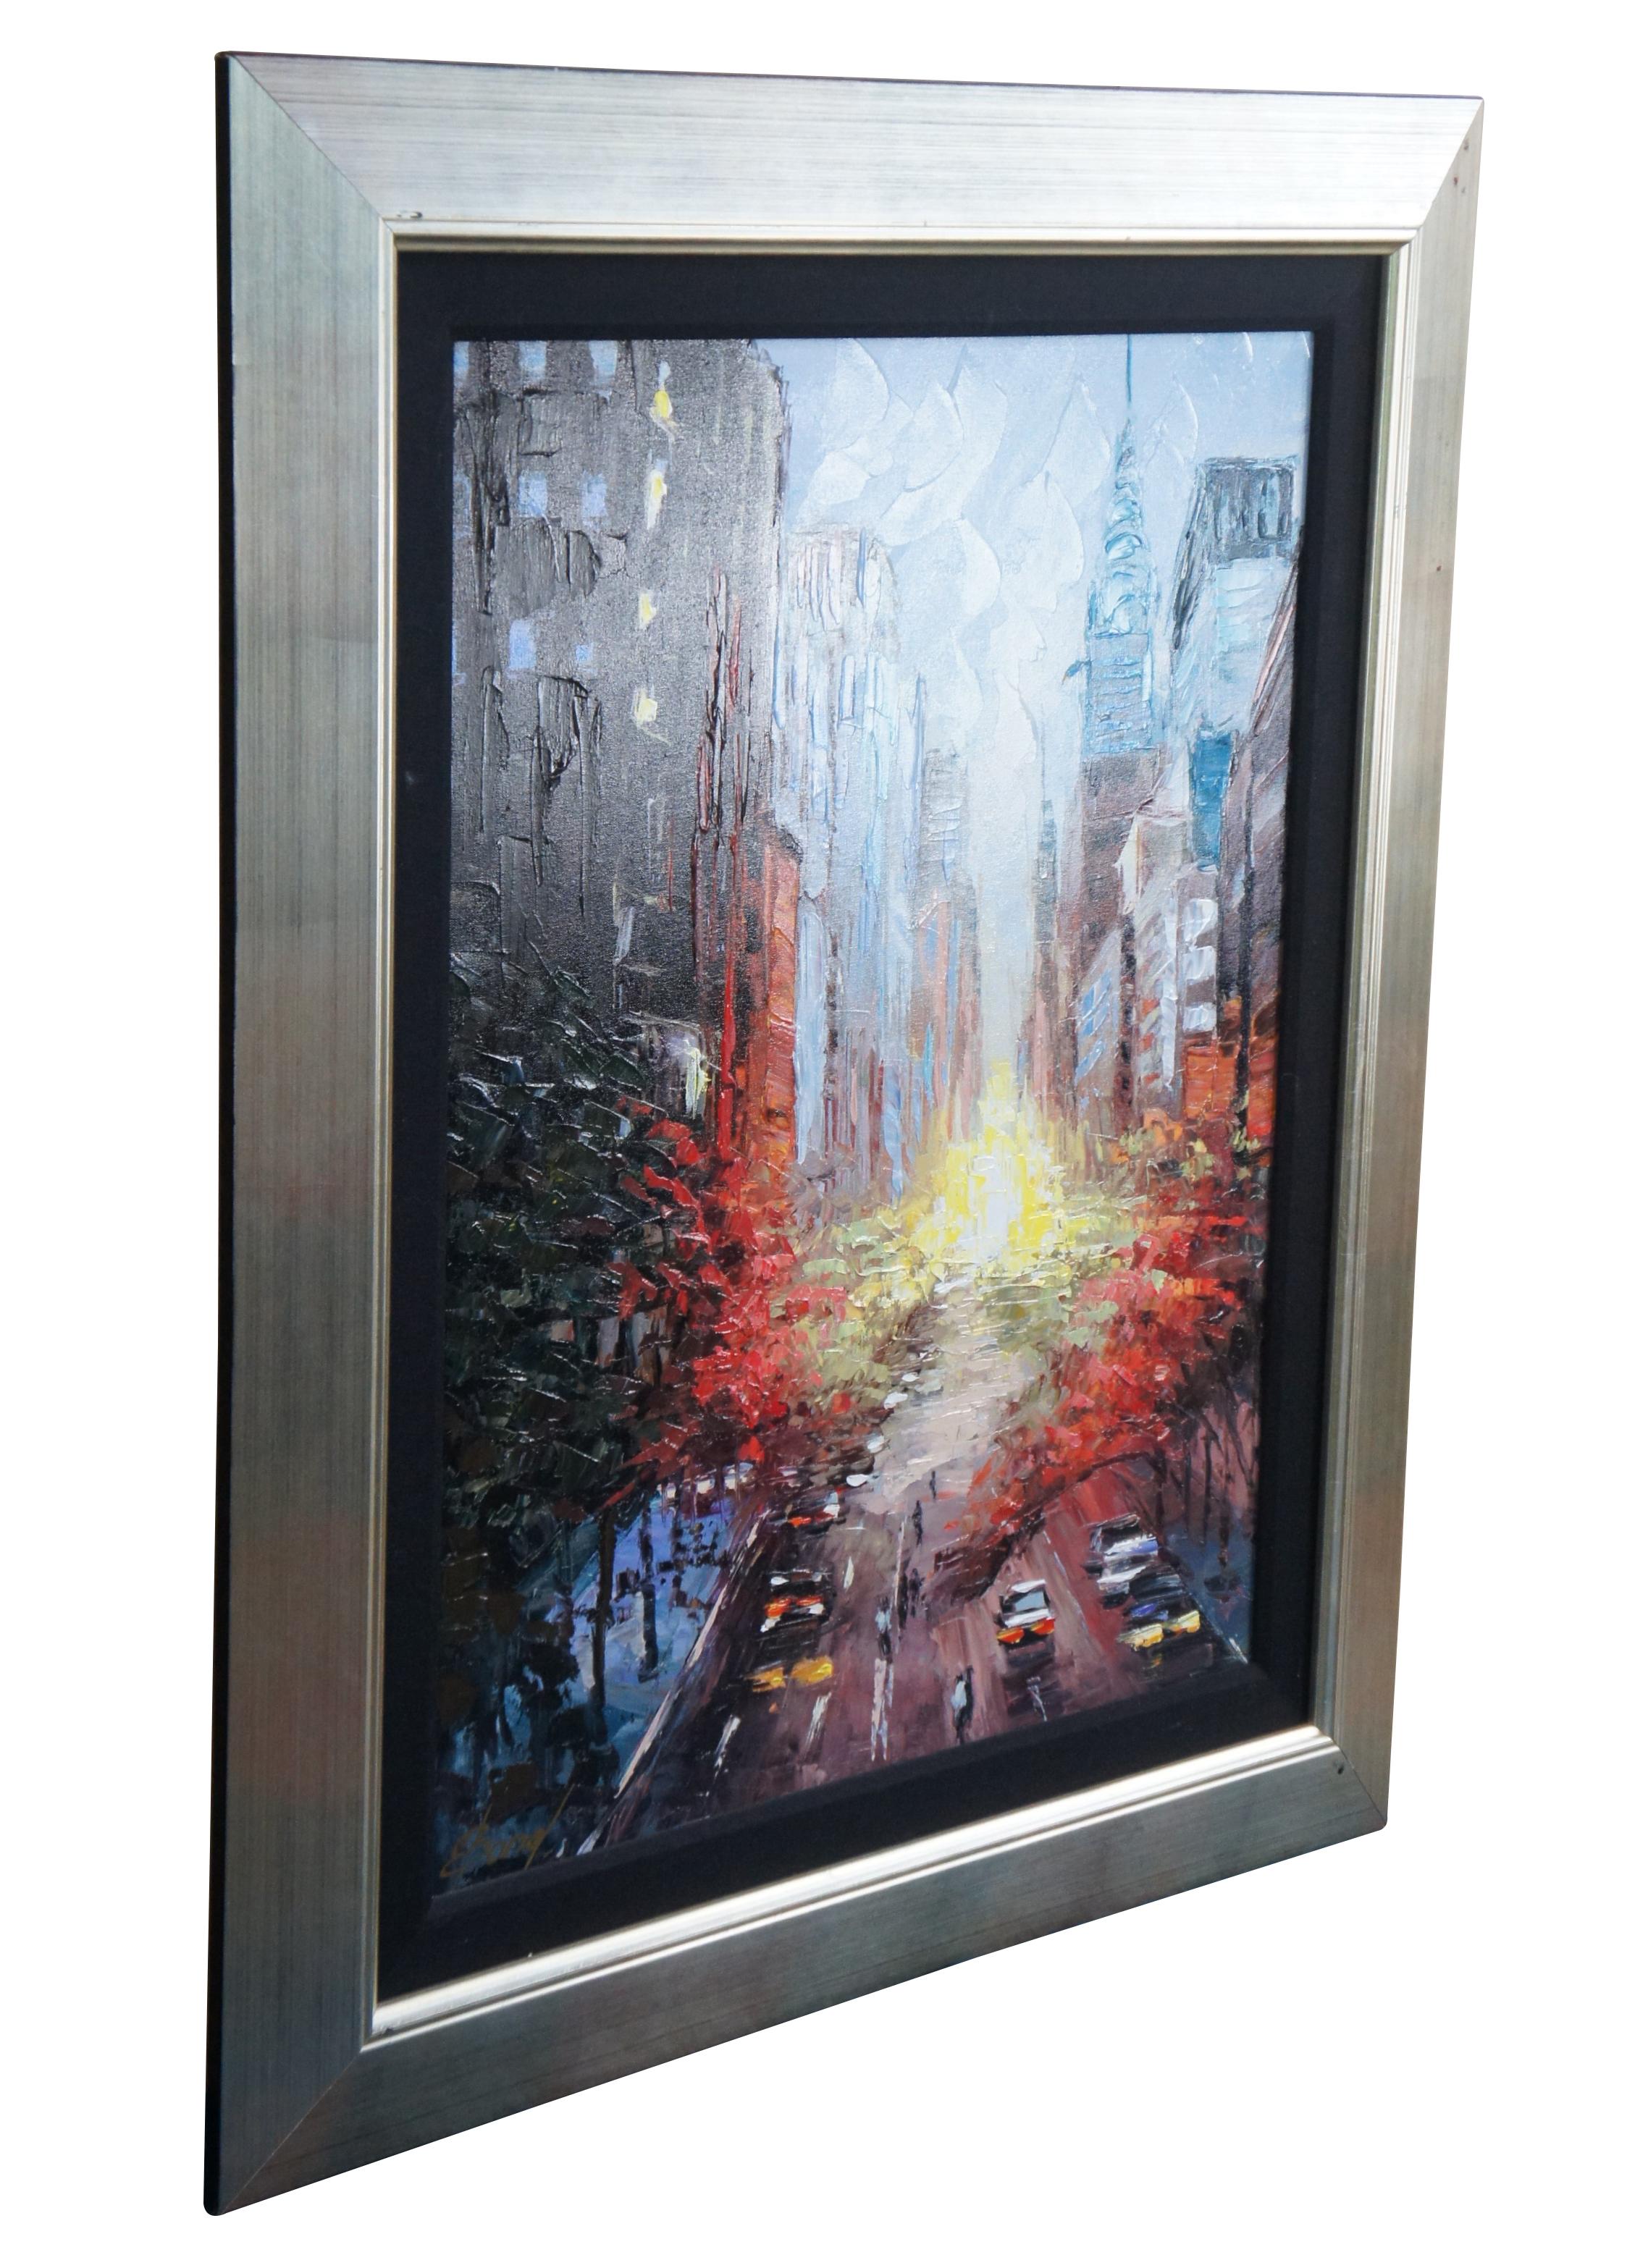 Large and impressive acrylic giclee on canvas by Elena Bond featuring an impressionist cityscape street scene of the sunset in New York. Purchased from Wentworth Gallery in Boca Raton.

Elena Bond was born in the beautiful old city of Samara,